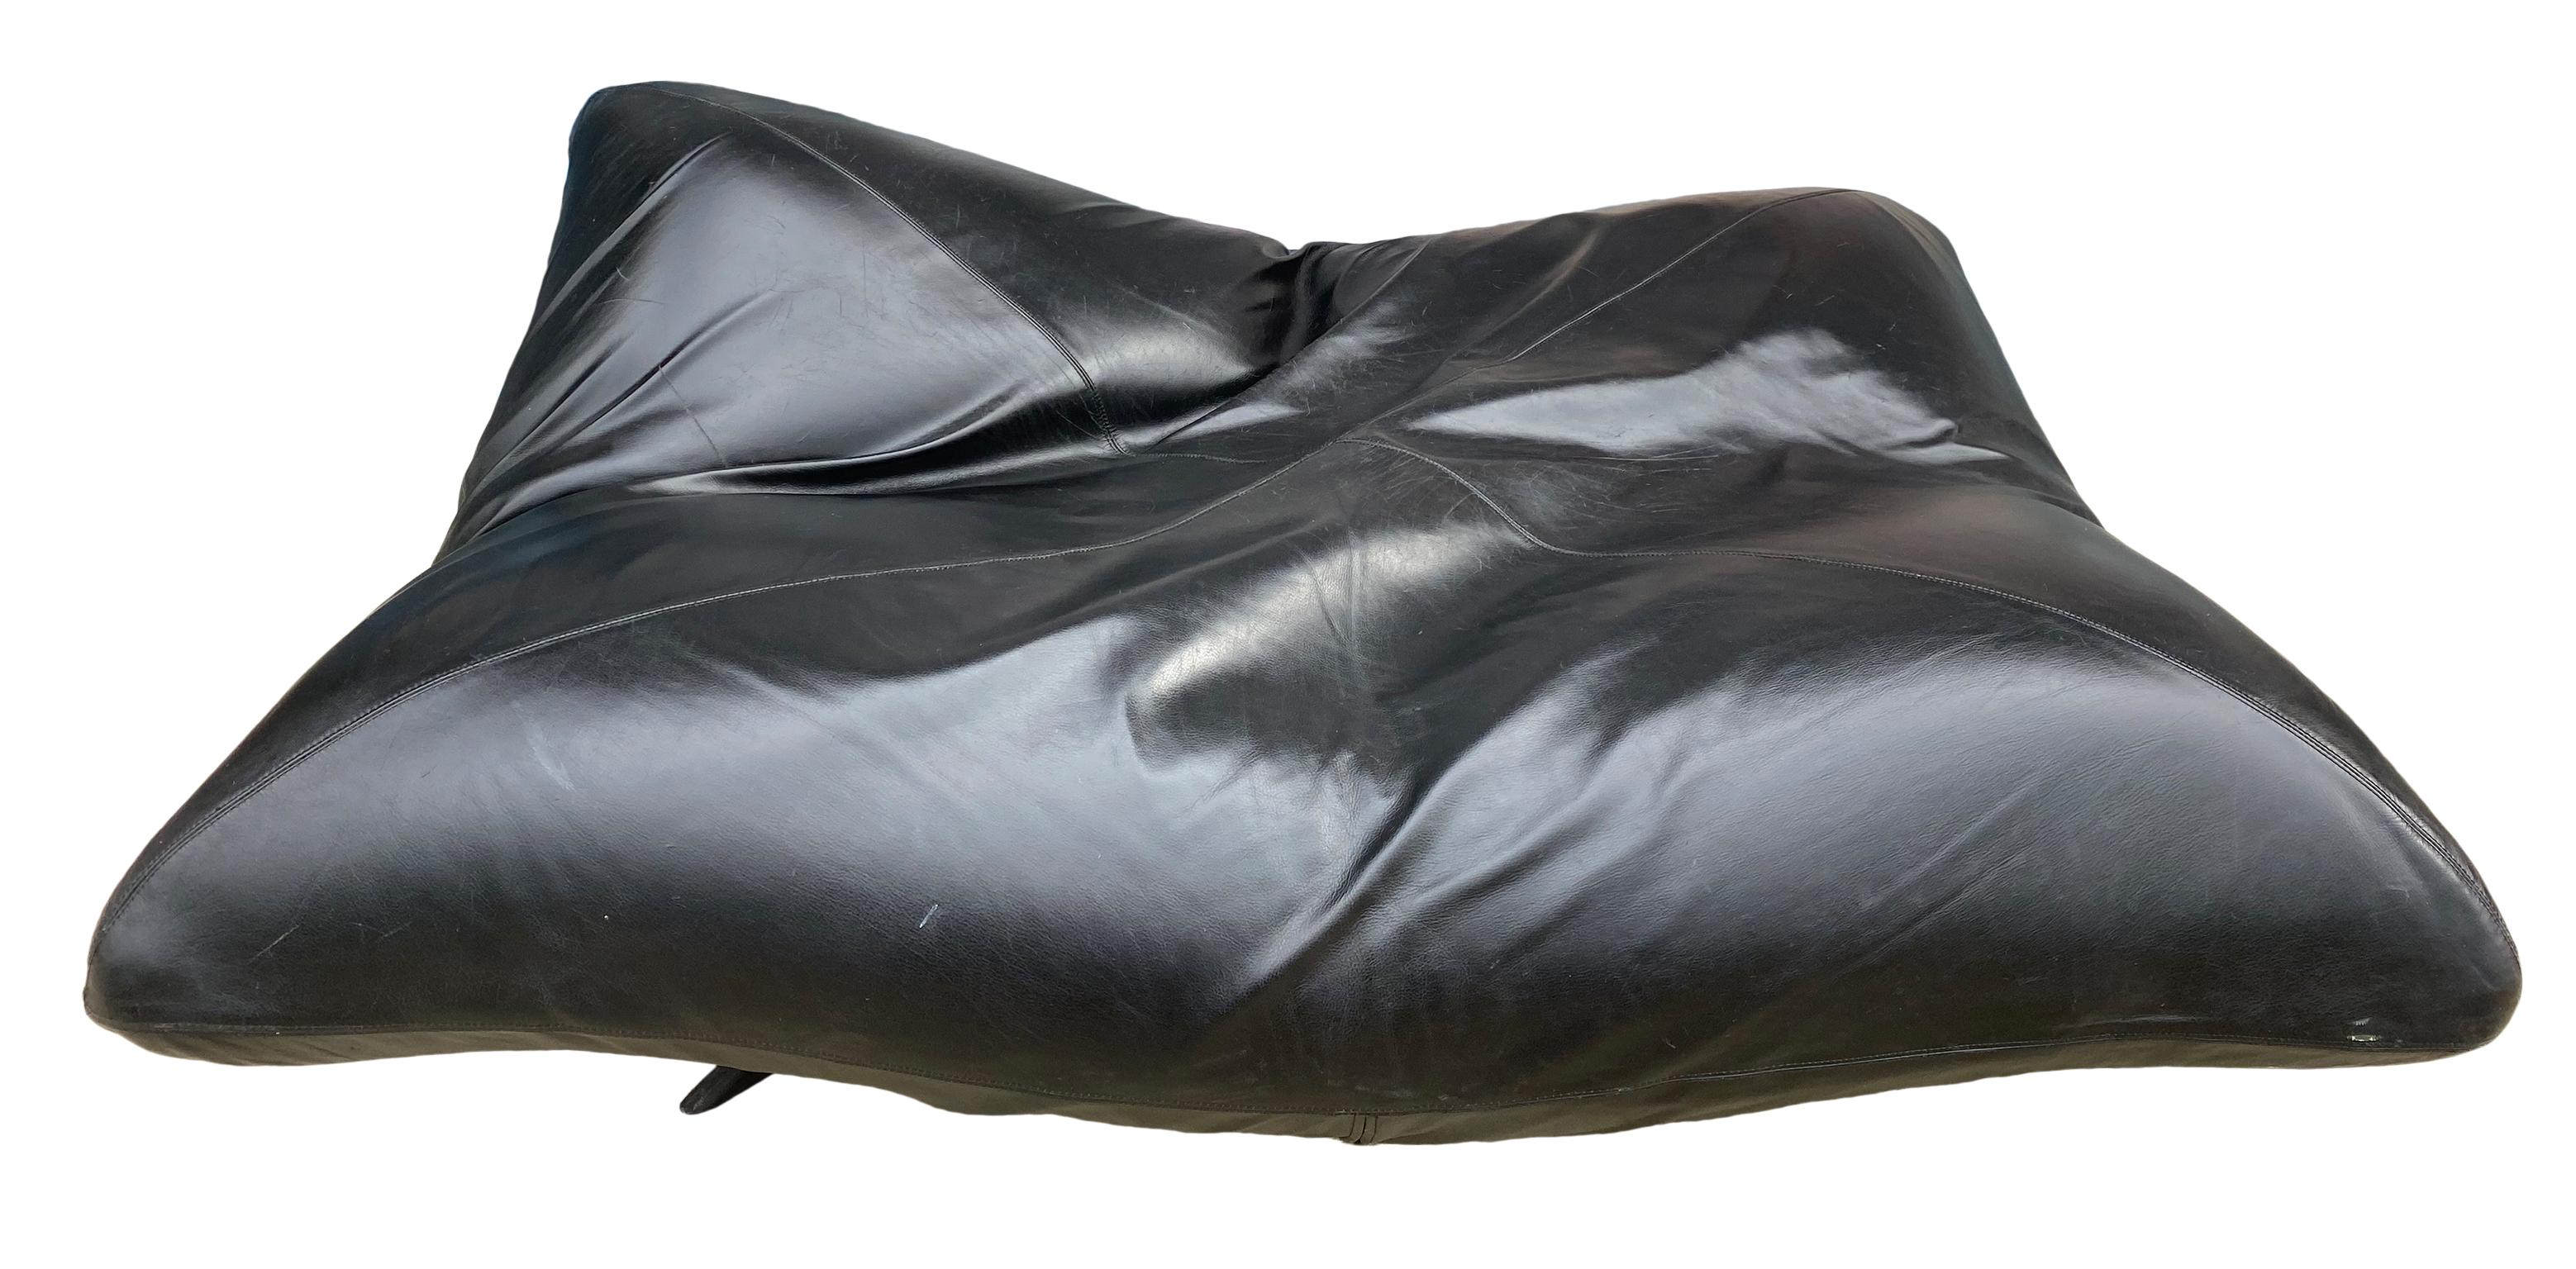 Fun designed black Leather articulating corner daybed sofa, Designed by Fabrizio Ballardini and Fulvio Forbicini, for Arflex circa 1980, made in Italy. Sofa has a metal base with 4 legs each corner ratchets up and locks into place very modular fun